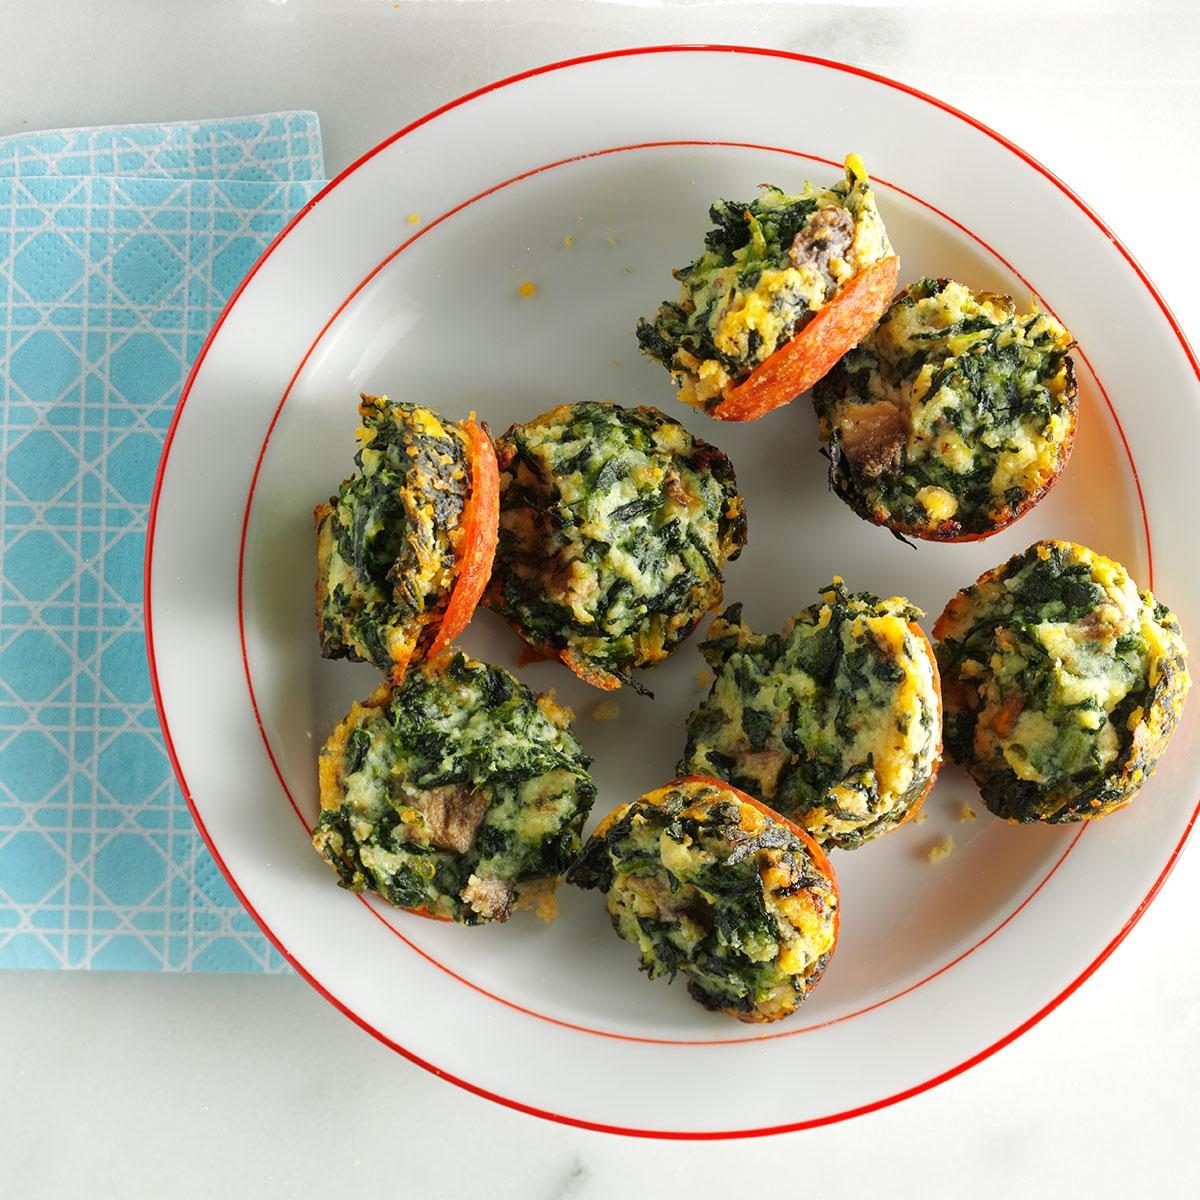 <p>People can't get enough of these pop-in-your-mouth mini frittatas. They're a cinch to make, freeze well and the recipe easily doubles for a crowd. —Nancy Statkevicus, Tucson, Arizona</p> <div class="listicle-page__buttons"> <div class="listicle-page__cta-button"><a href='https://www.tasteofhome.com/recipes/mini-spinach-frittatas/'>Go to Recipe</a></div> </div>